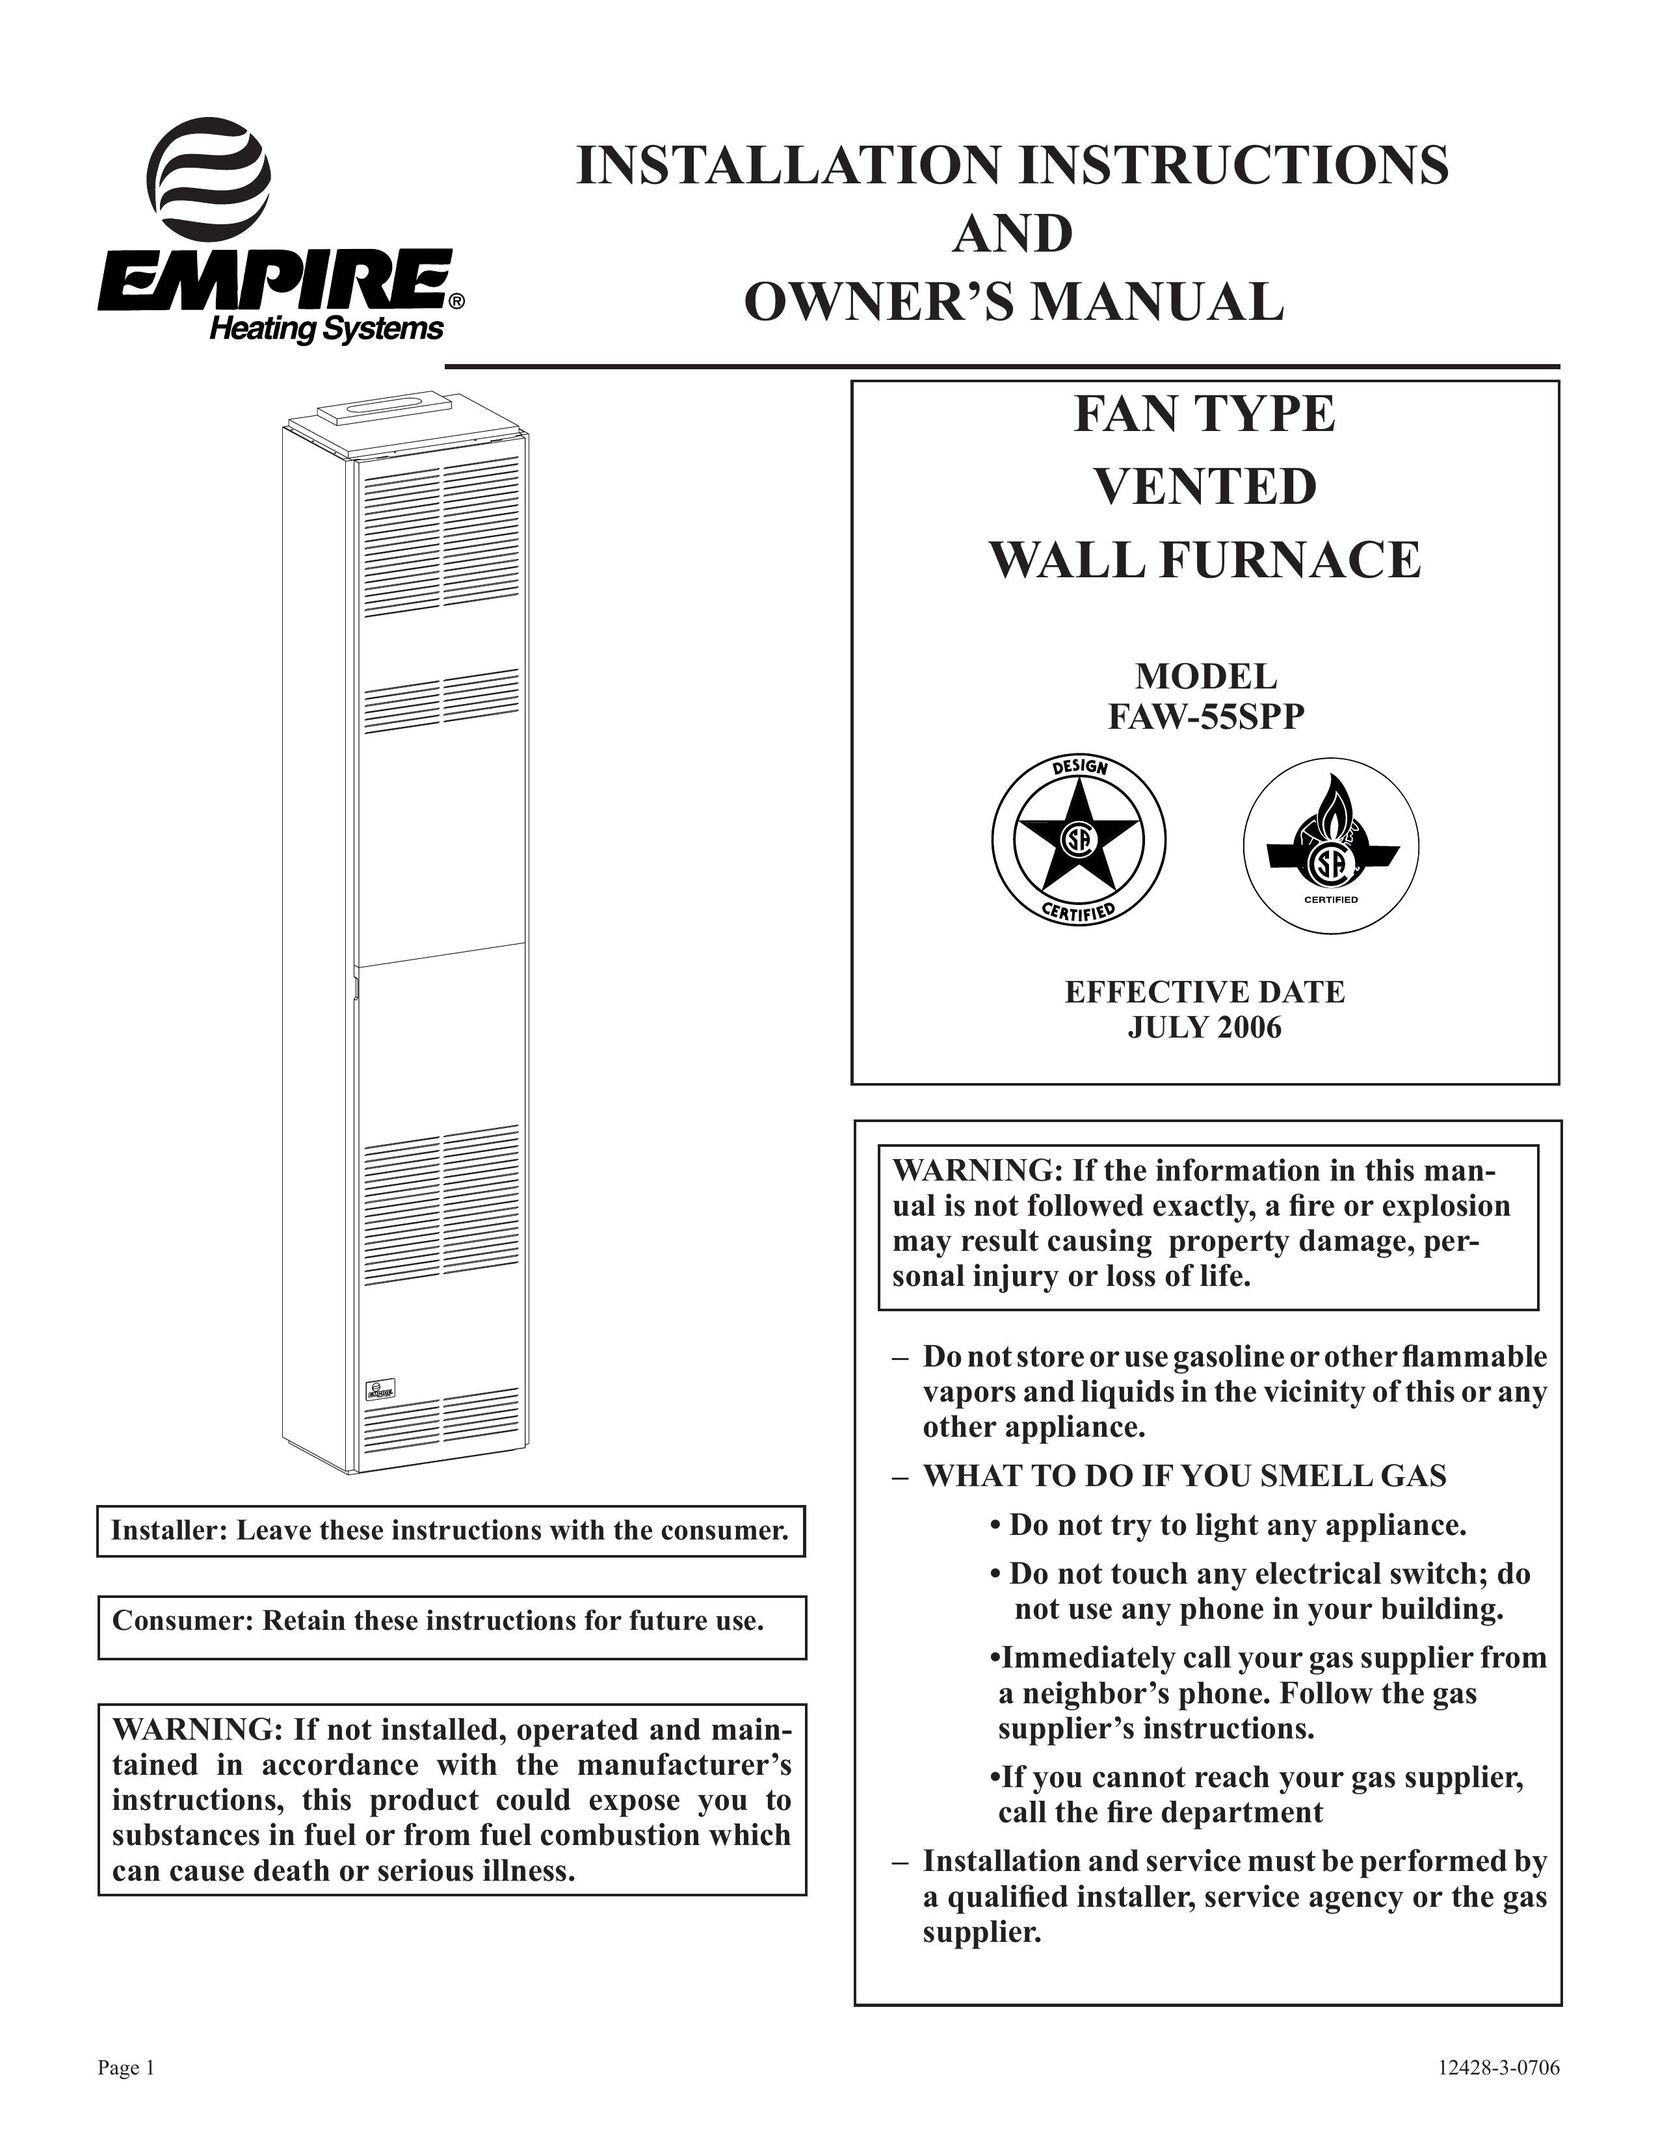 Empire Comfort Systems FAW-55SPP Furnace User Manual